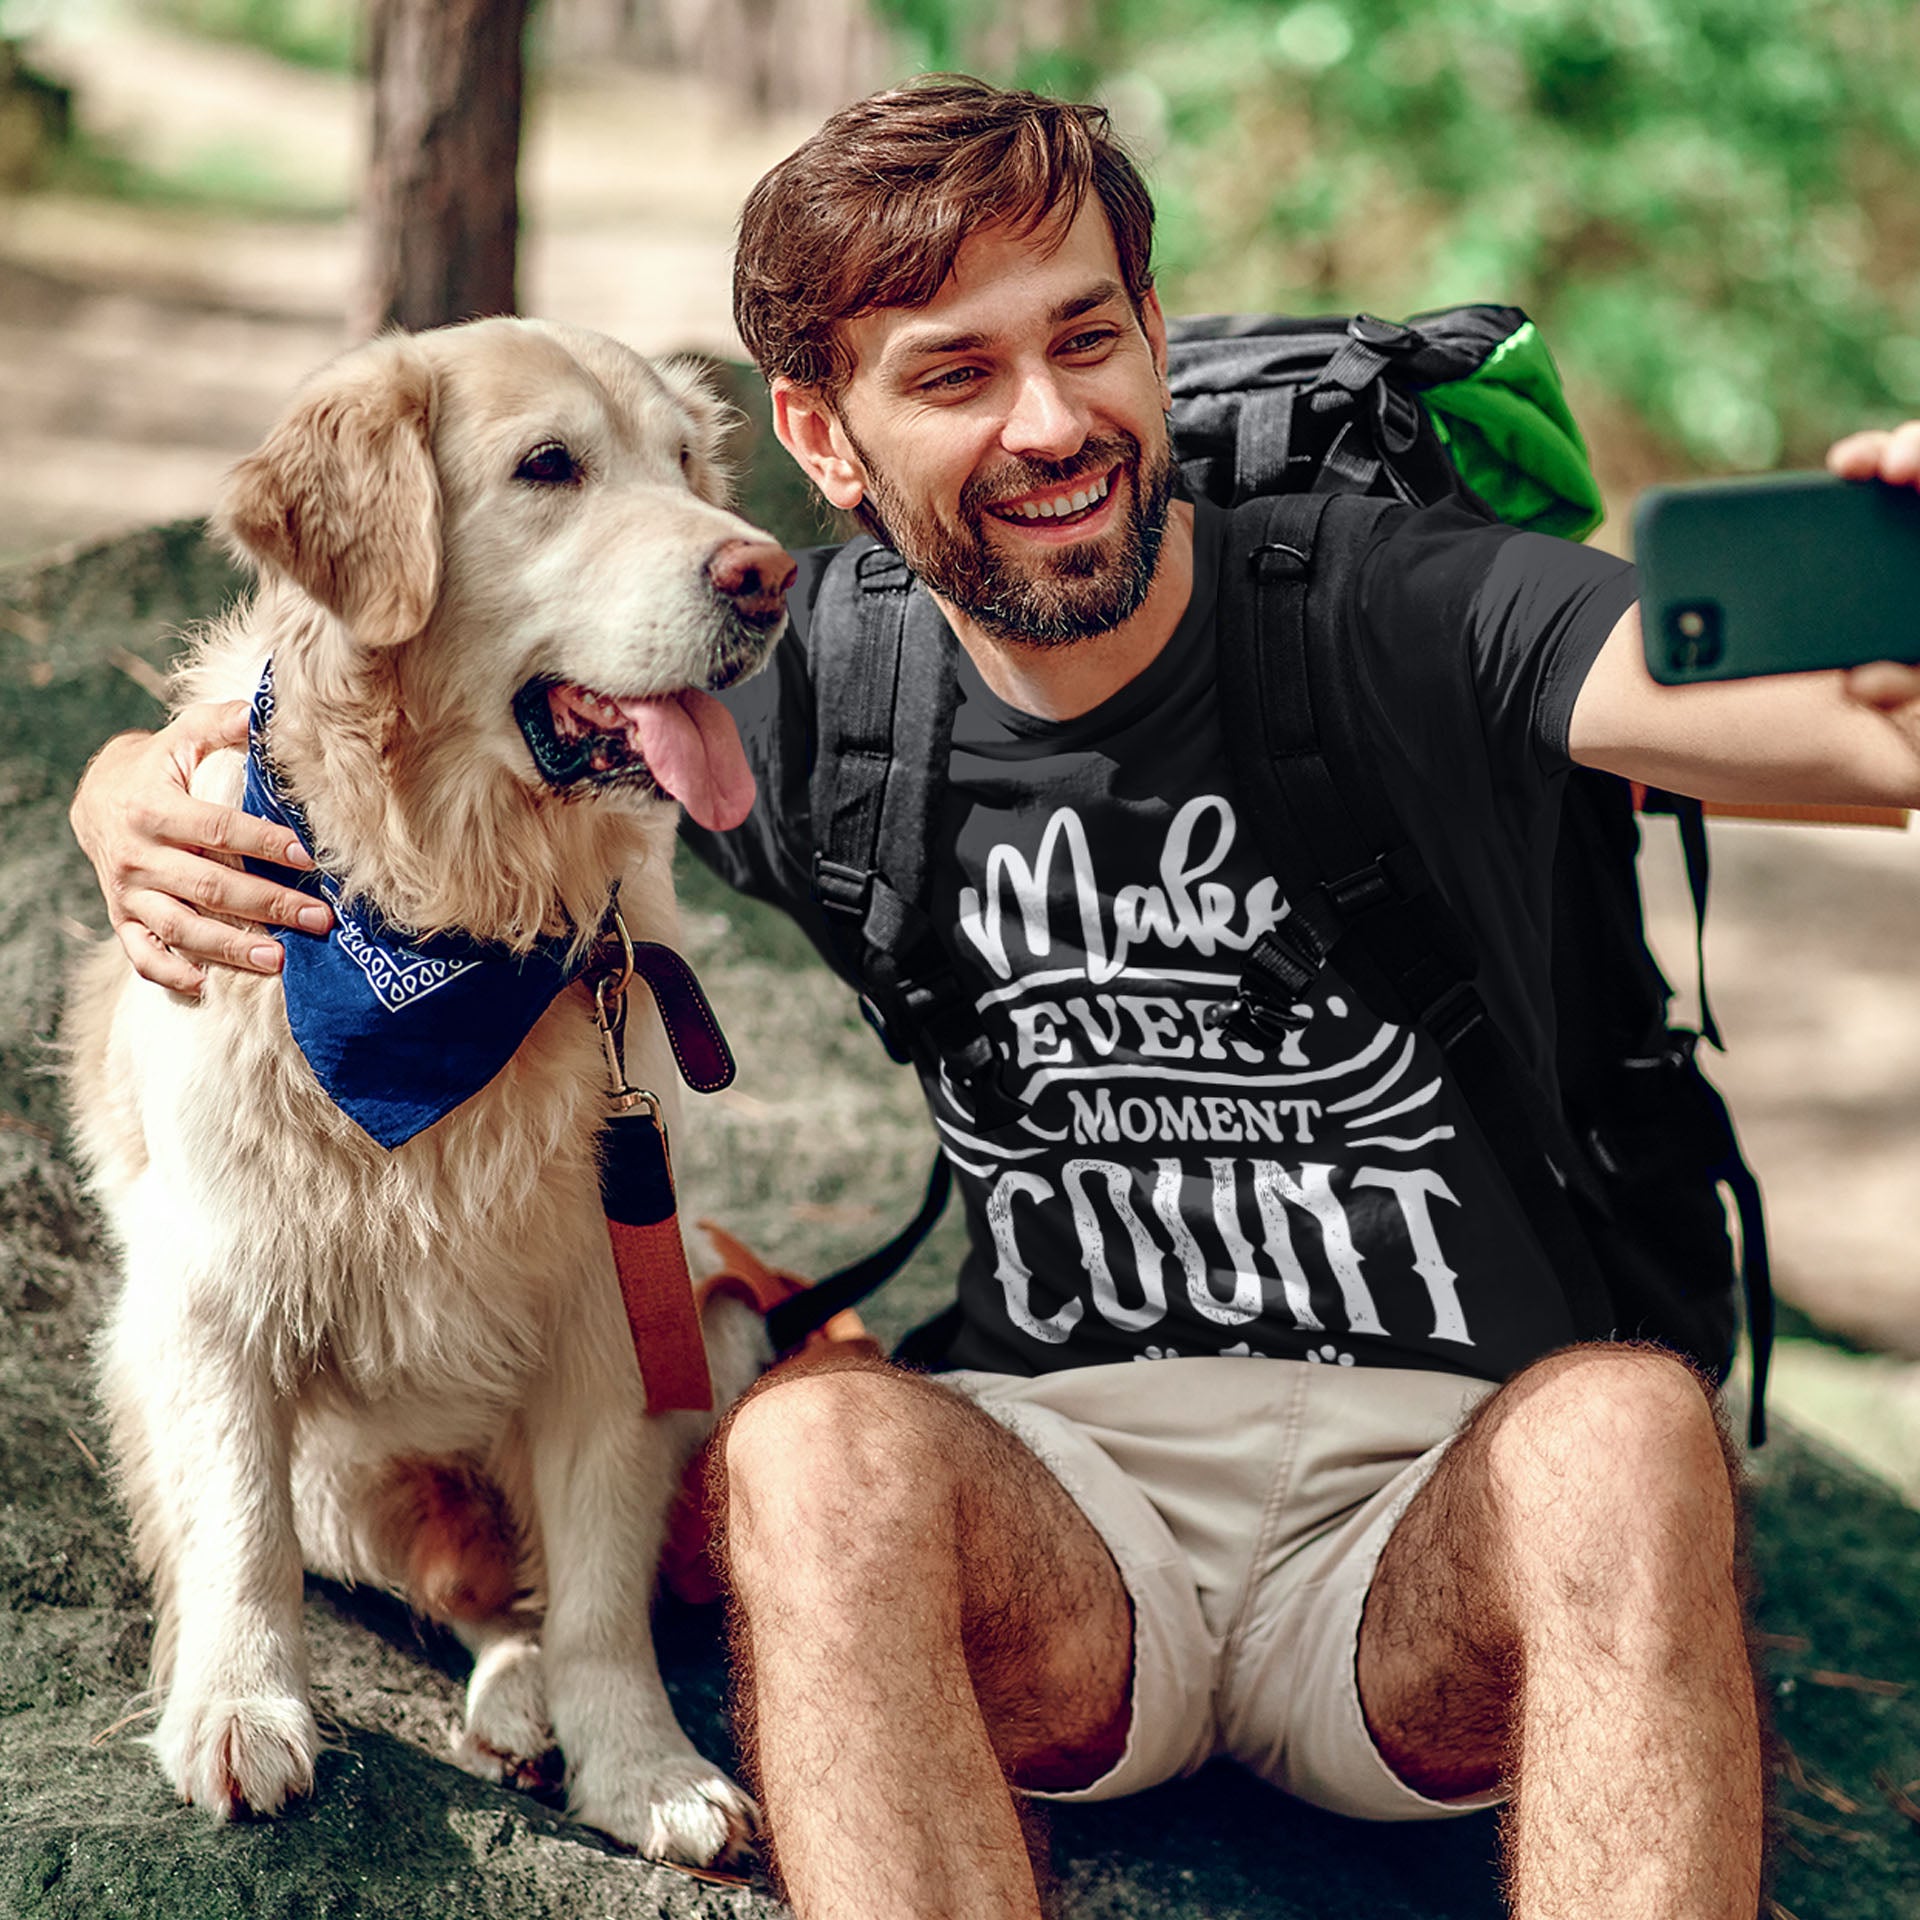  A man wearing a Dogs Pure Love tee with the slogan "Make Every Moment Count" takes a selfie with his Golden Retriever as they sit on a rock in a forest setting.